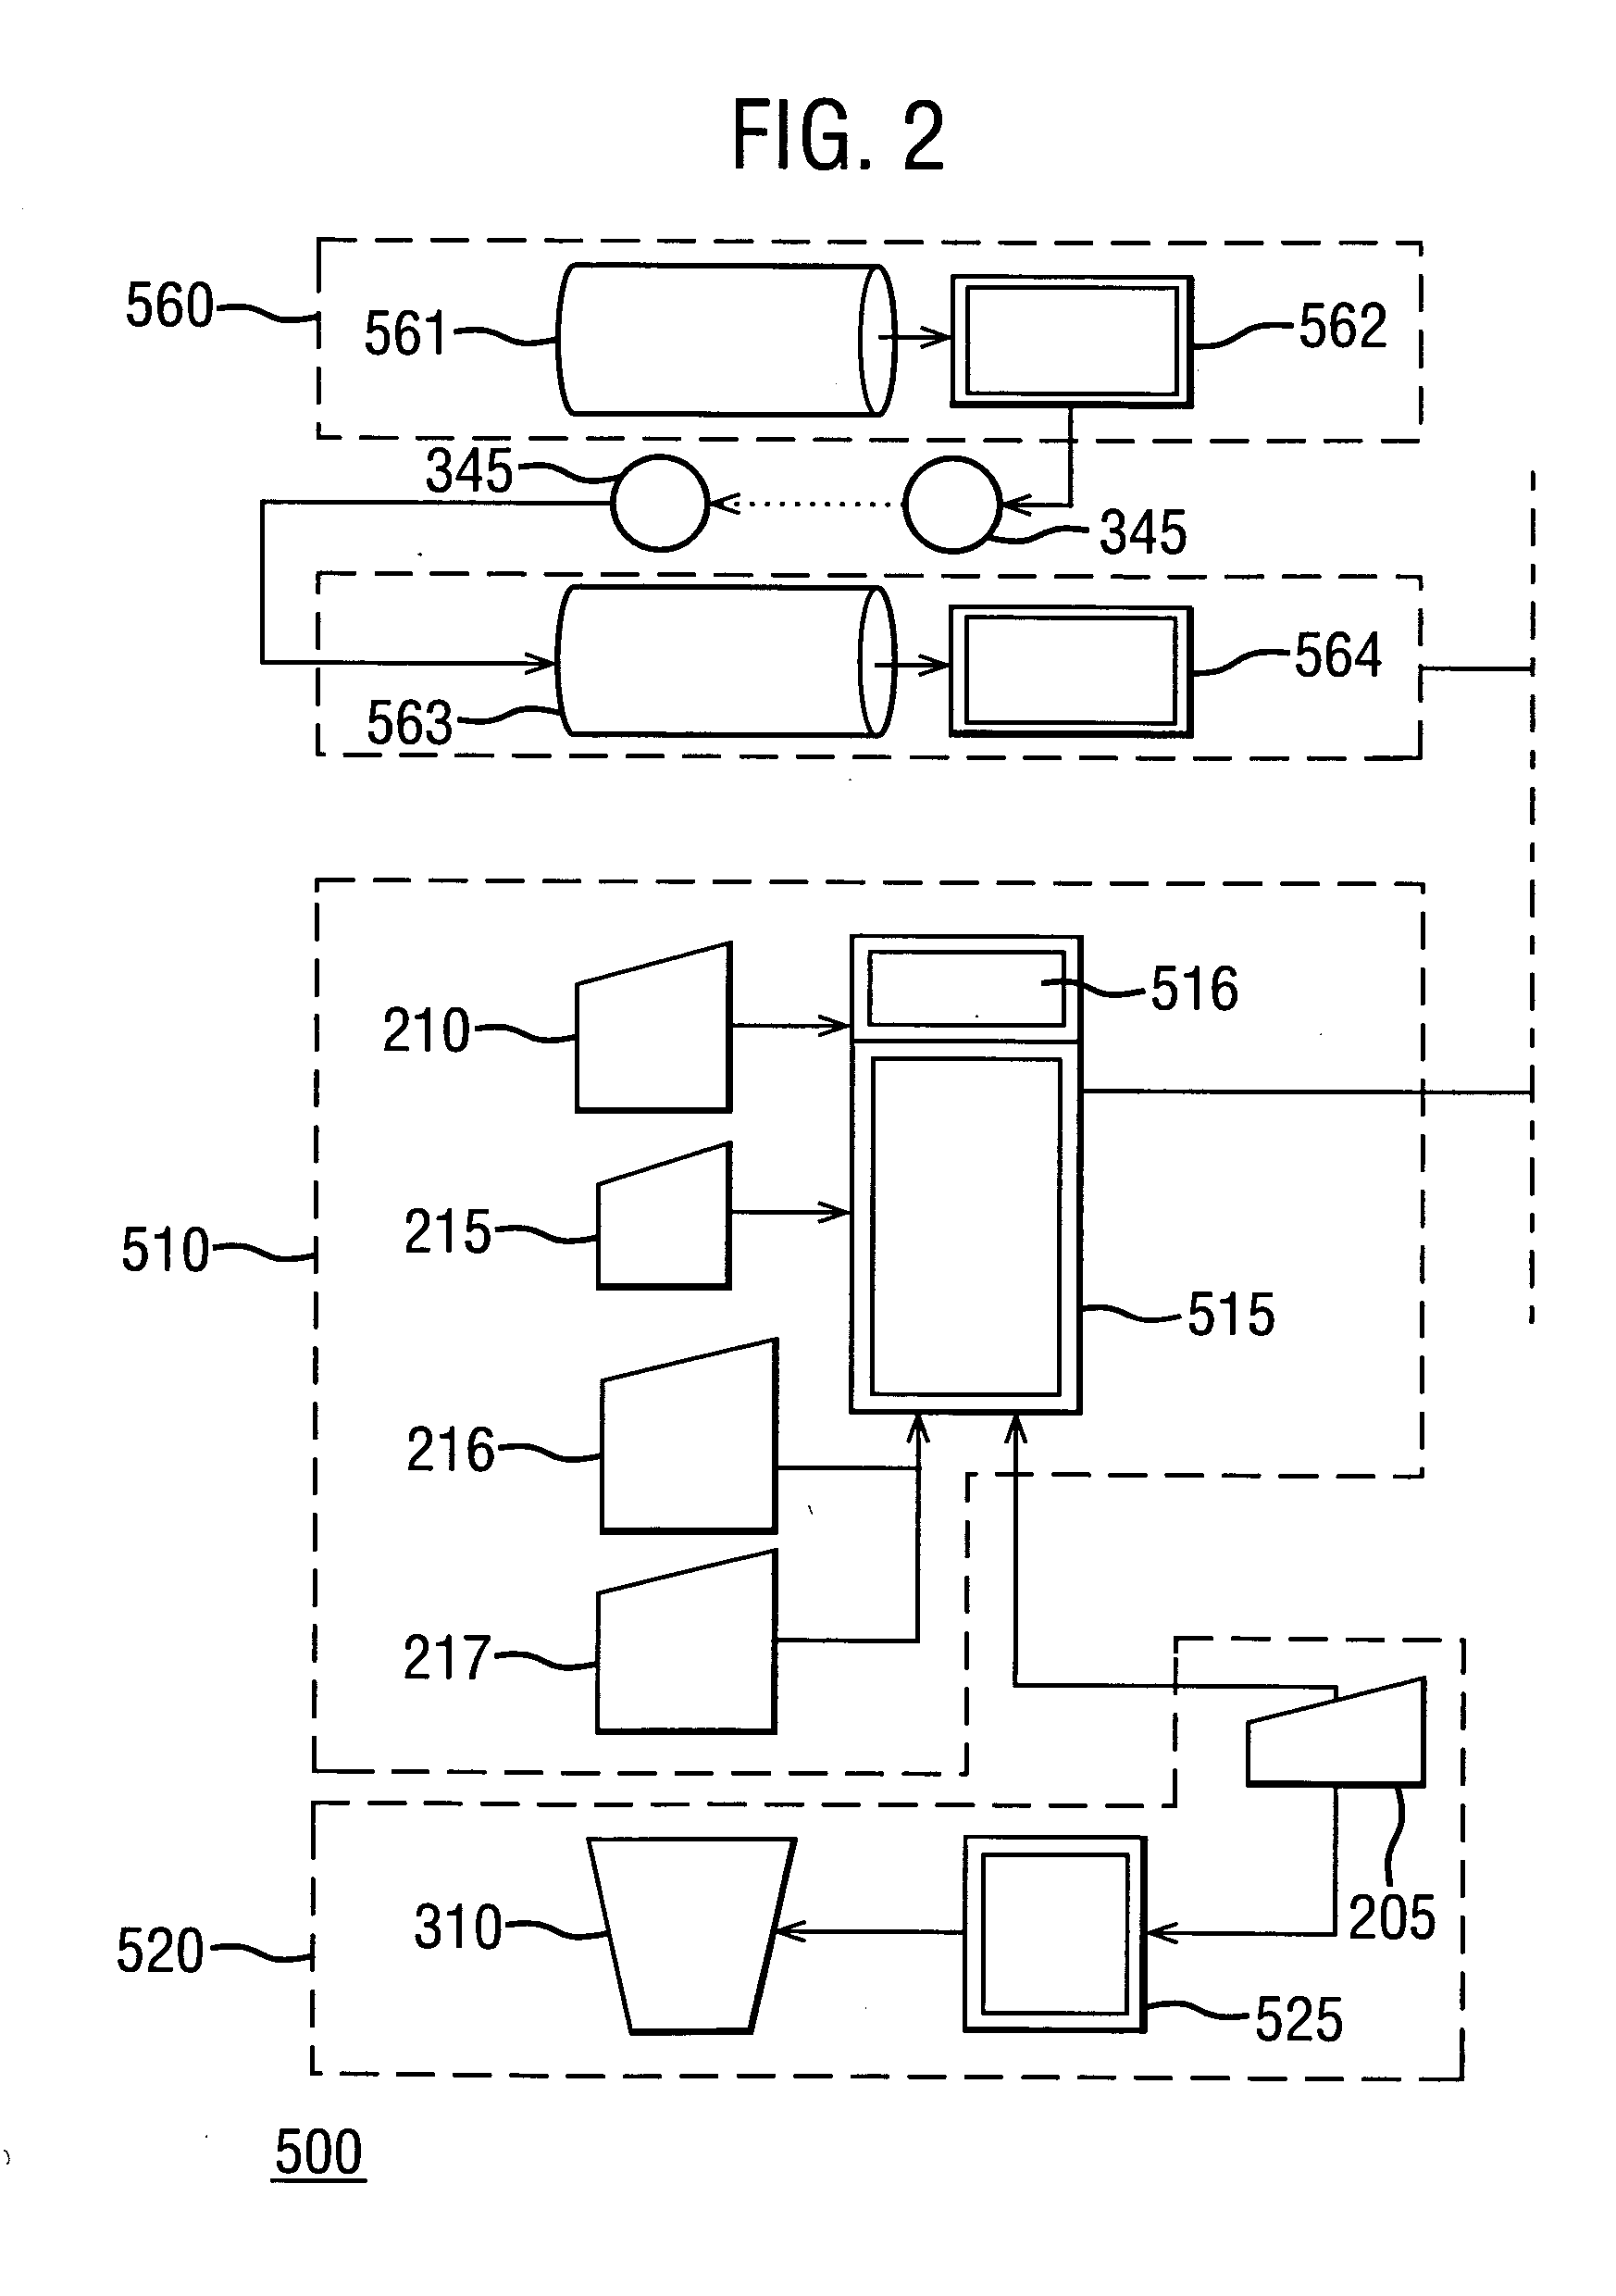 Method and system for analyzing coatings undergoing exposure testing